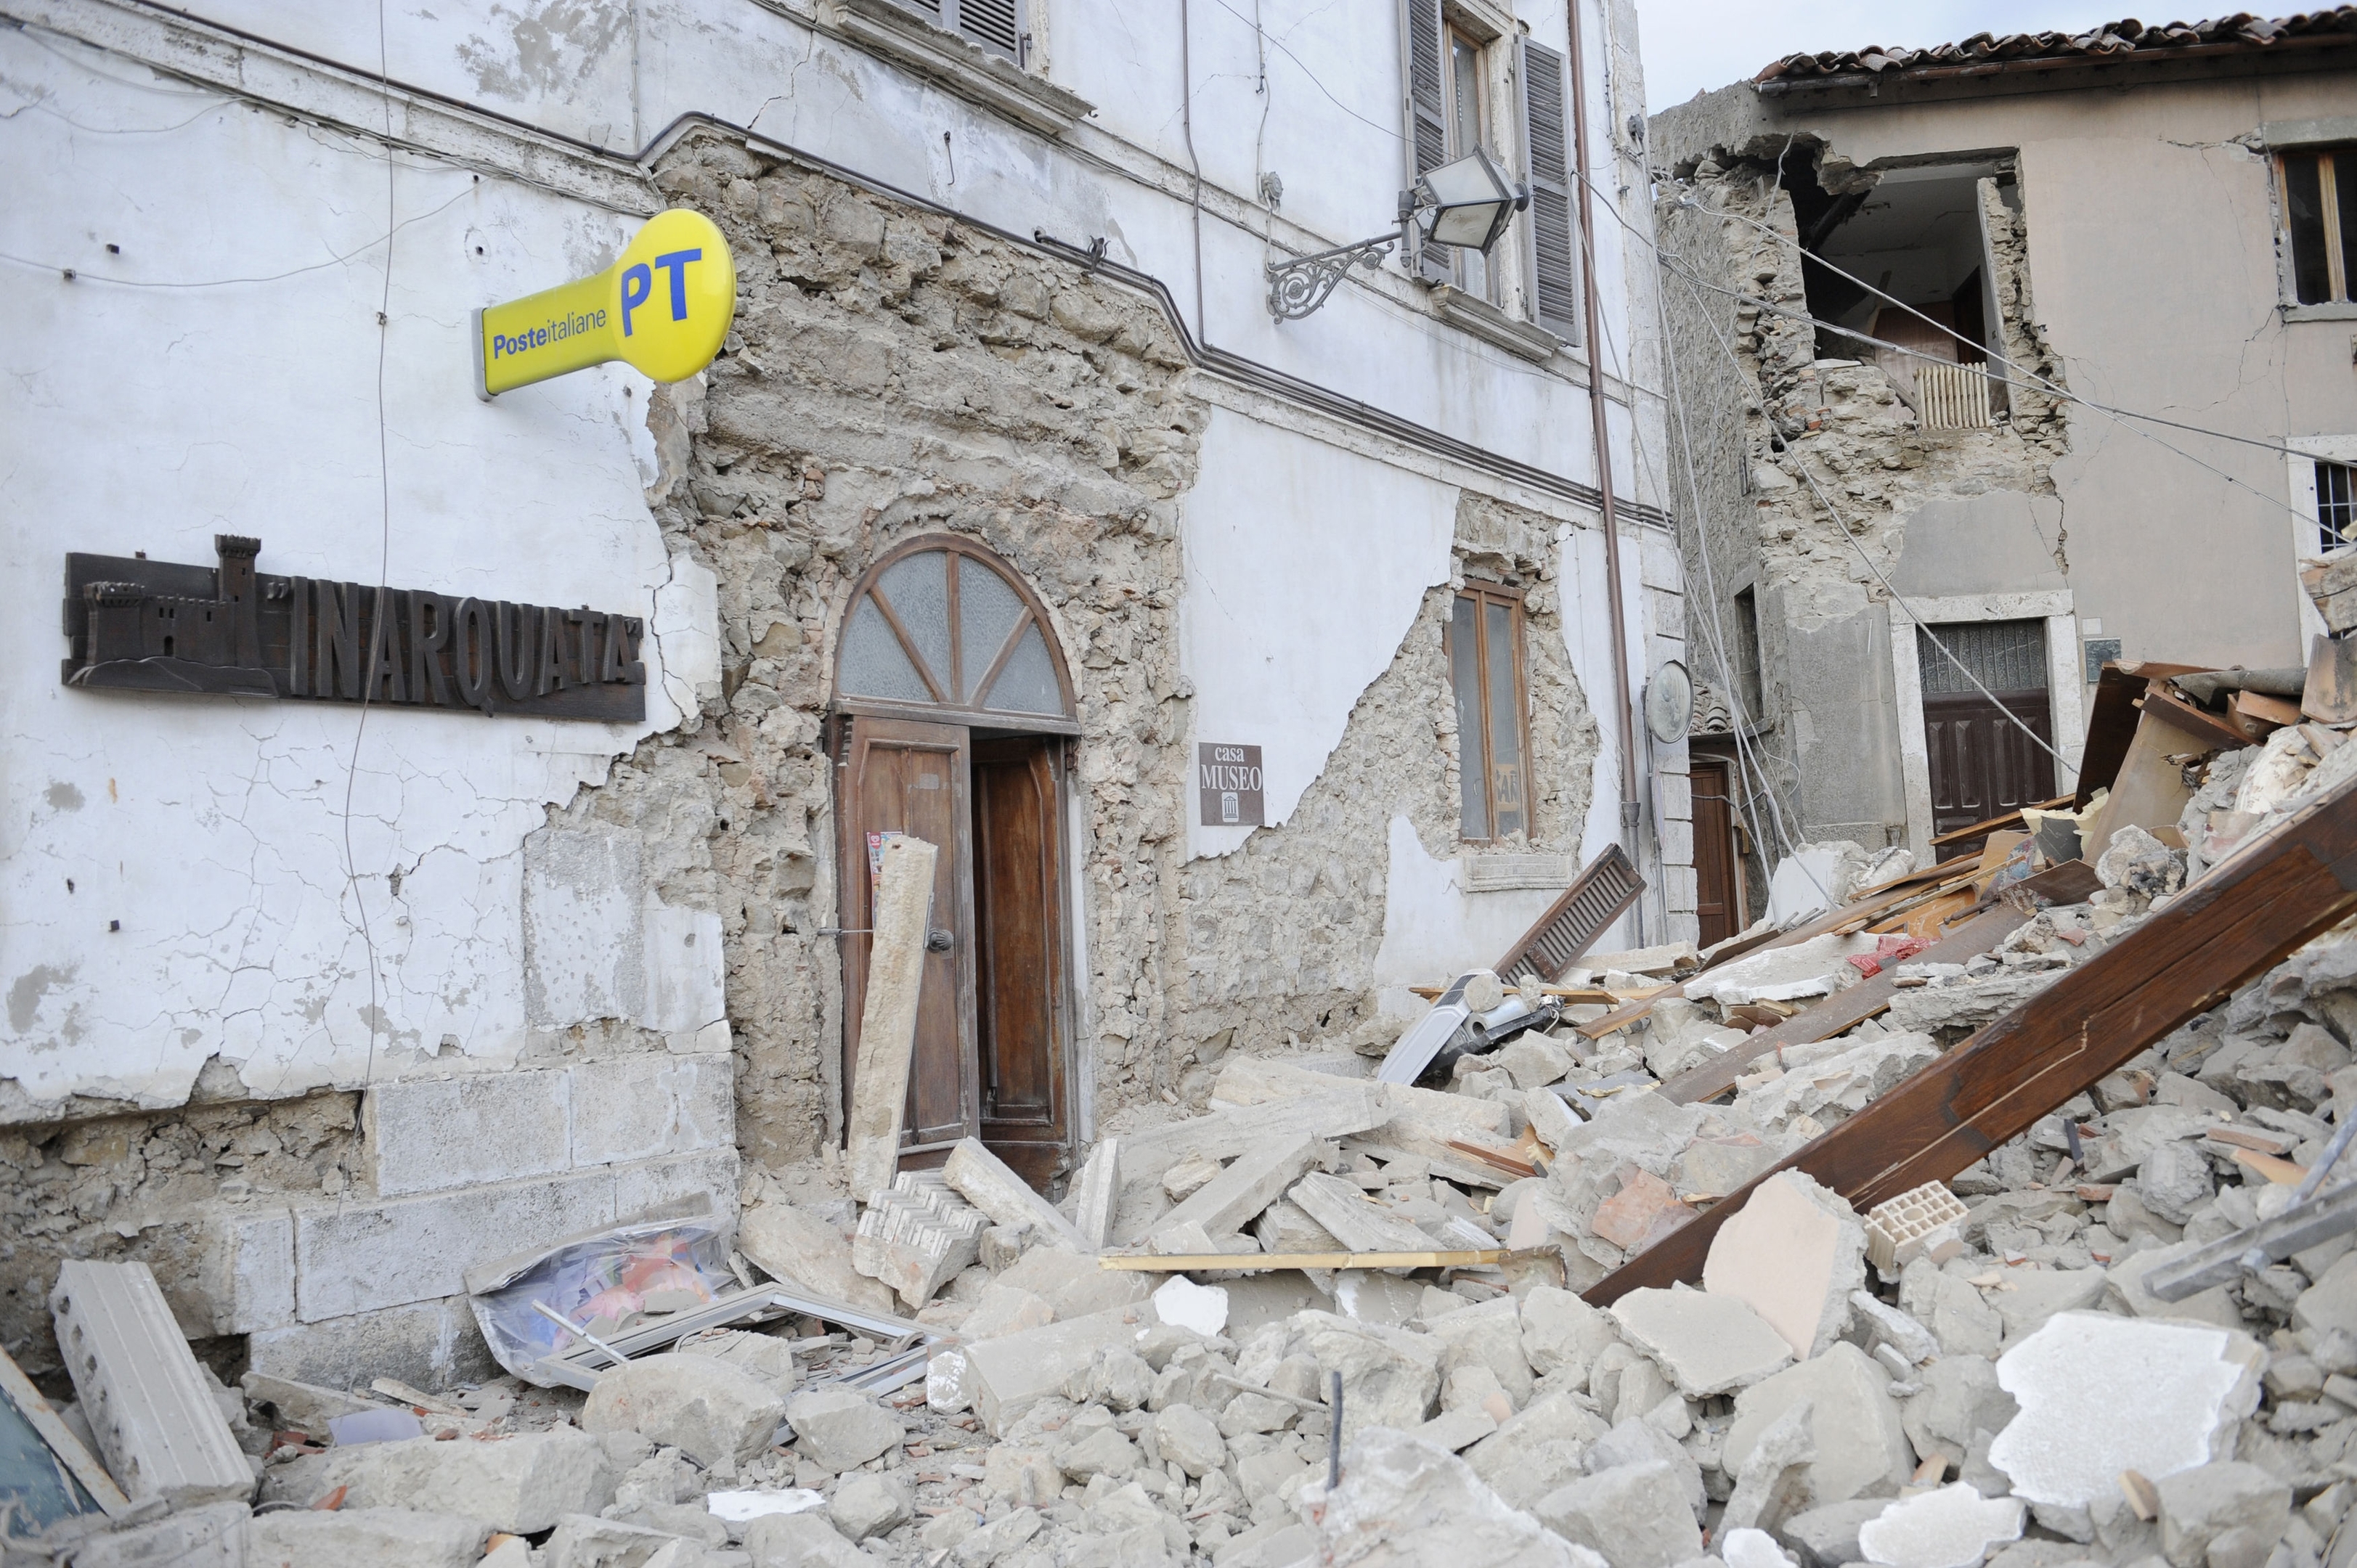 A post office is engulfed by rubbles in Arcuata del Tronto, central Italy, 